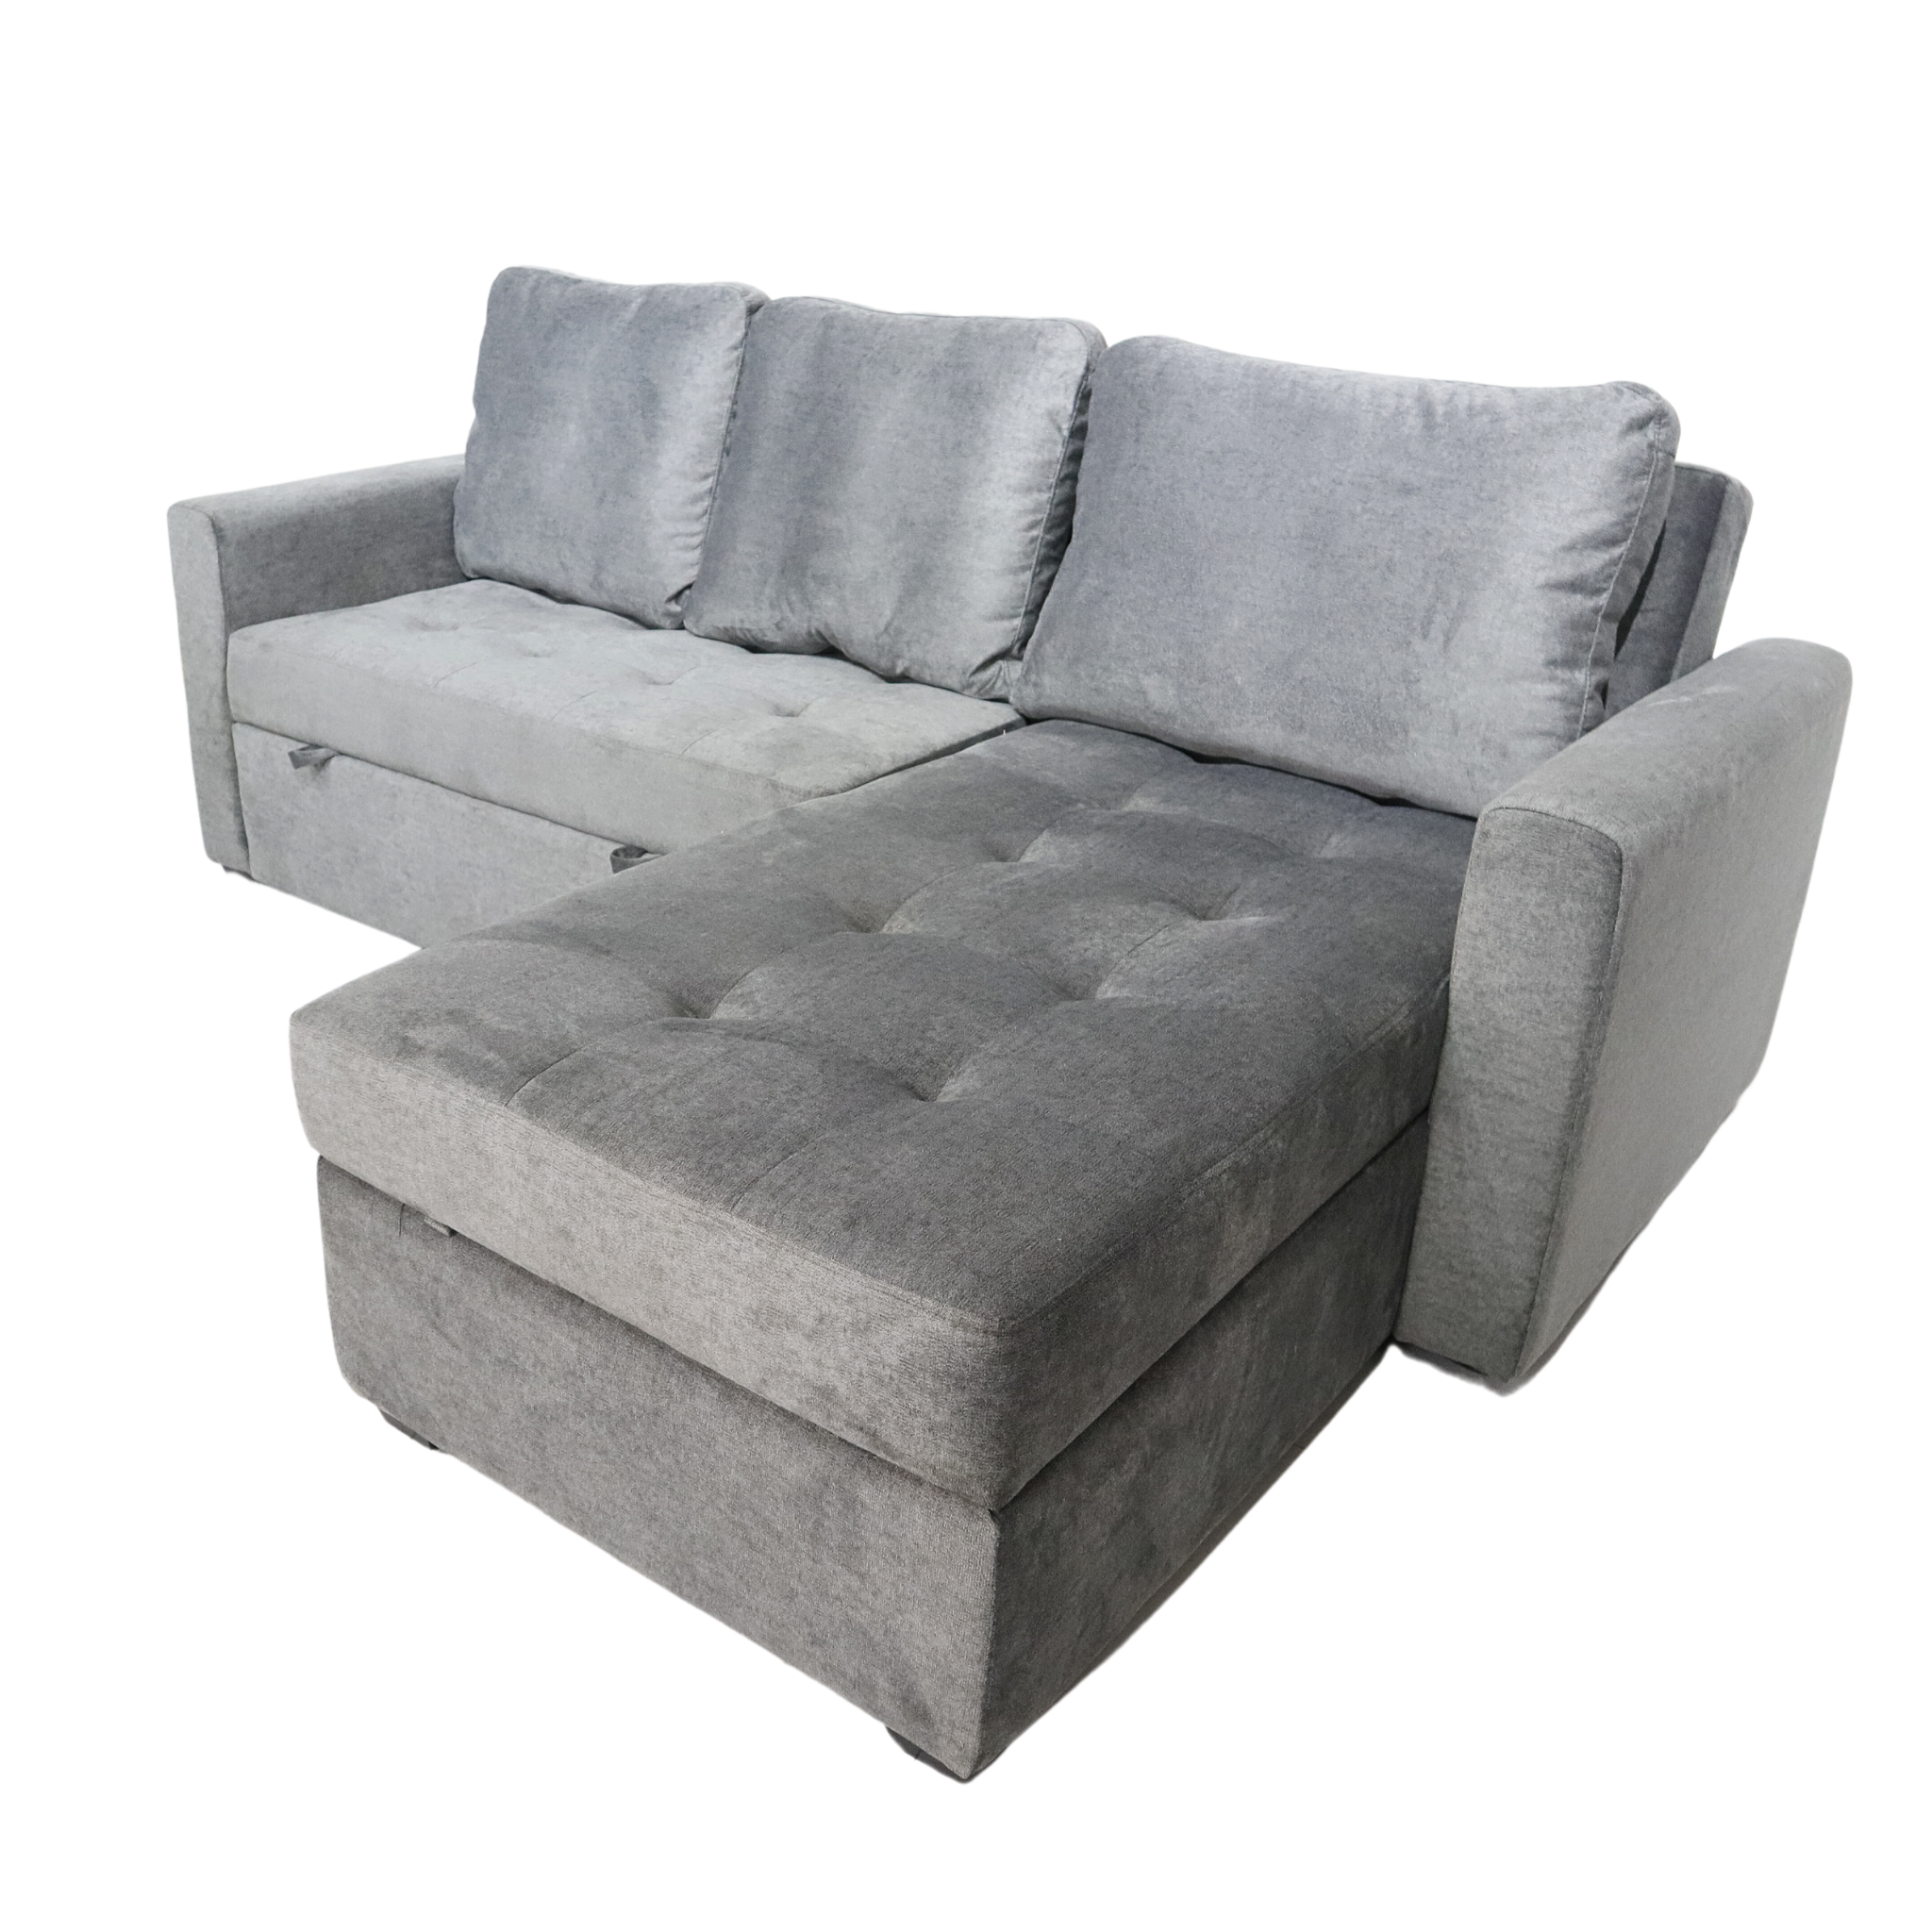 DARCY Sofabed with Storage Chaise AF Home